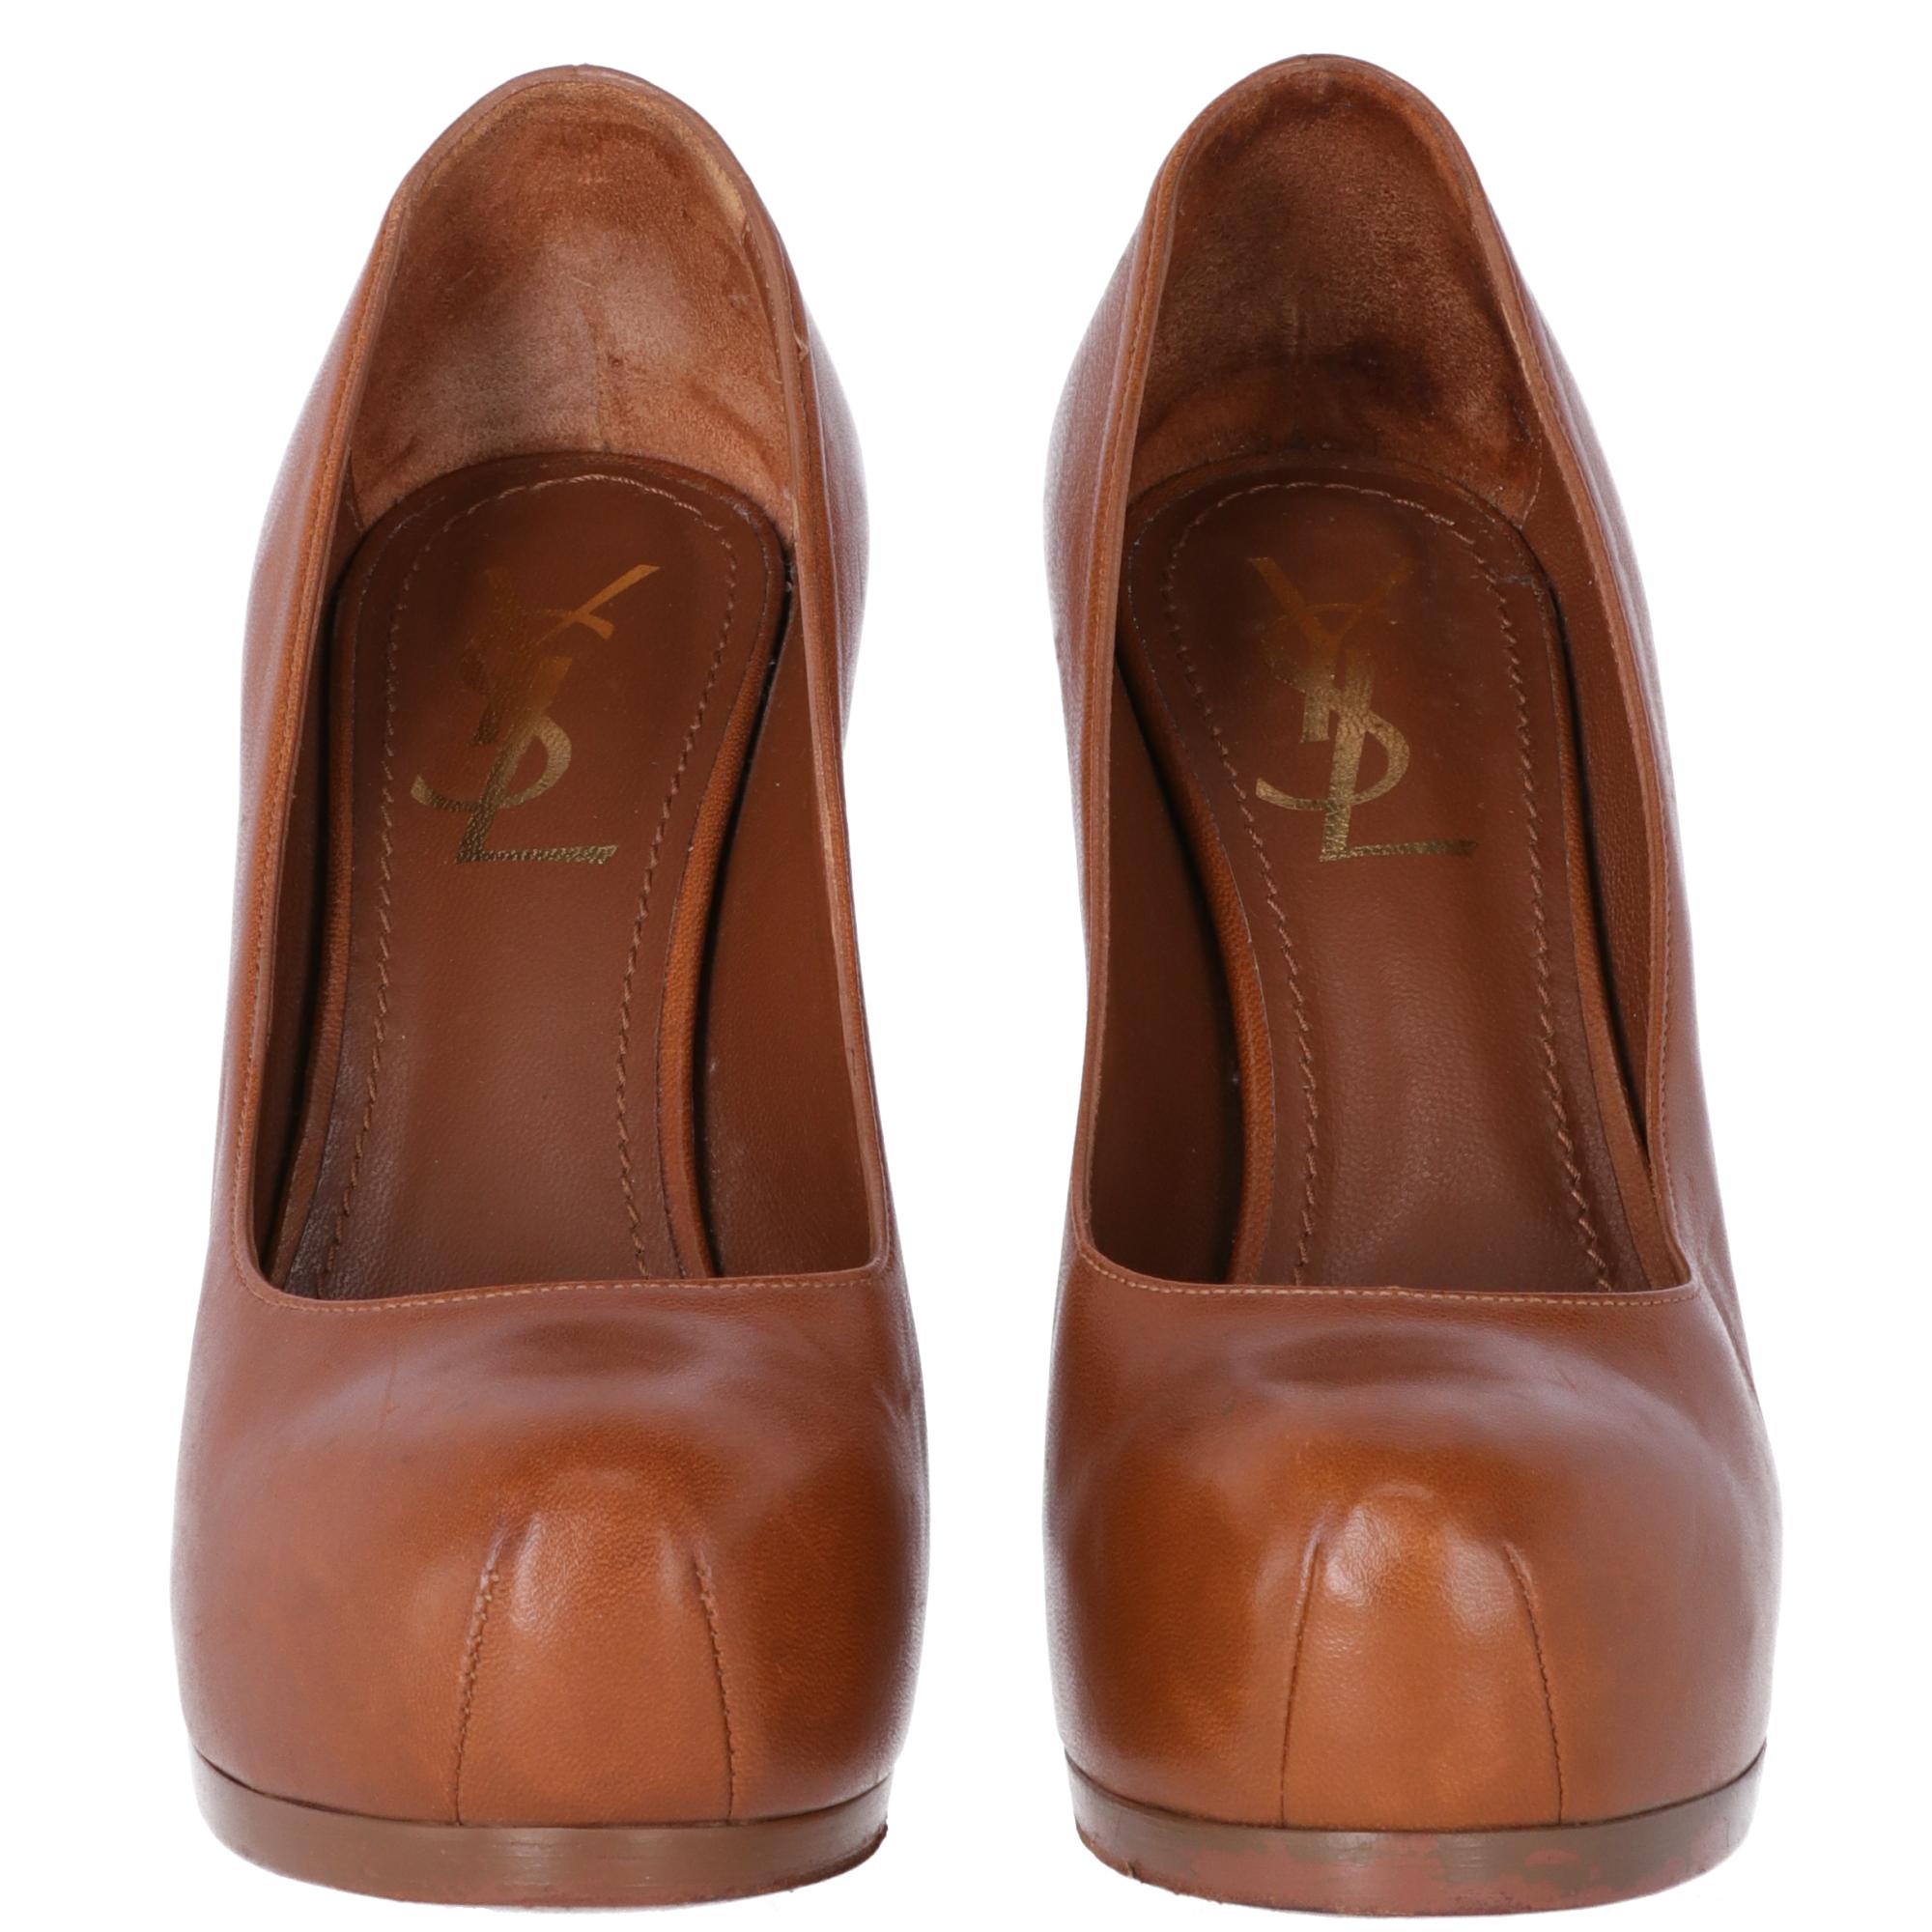 Yves Saint Laurent genuine brown leather fashionable Tribtoo pumps with almond point and two seams. Stiletto heel, outer thin platform and inner invisible platform.  Brown genuine leather insole and gold printed logo. Serial number printed